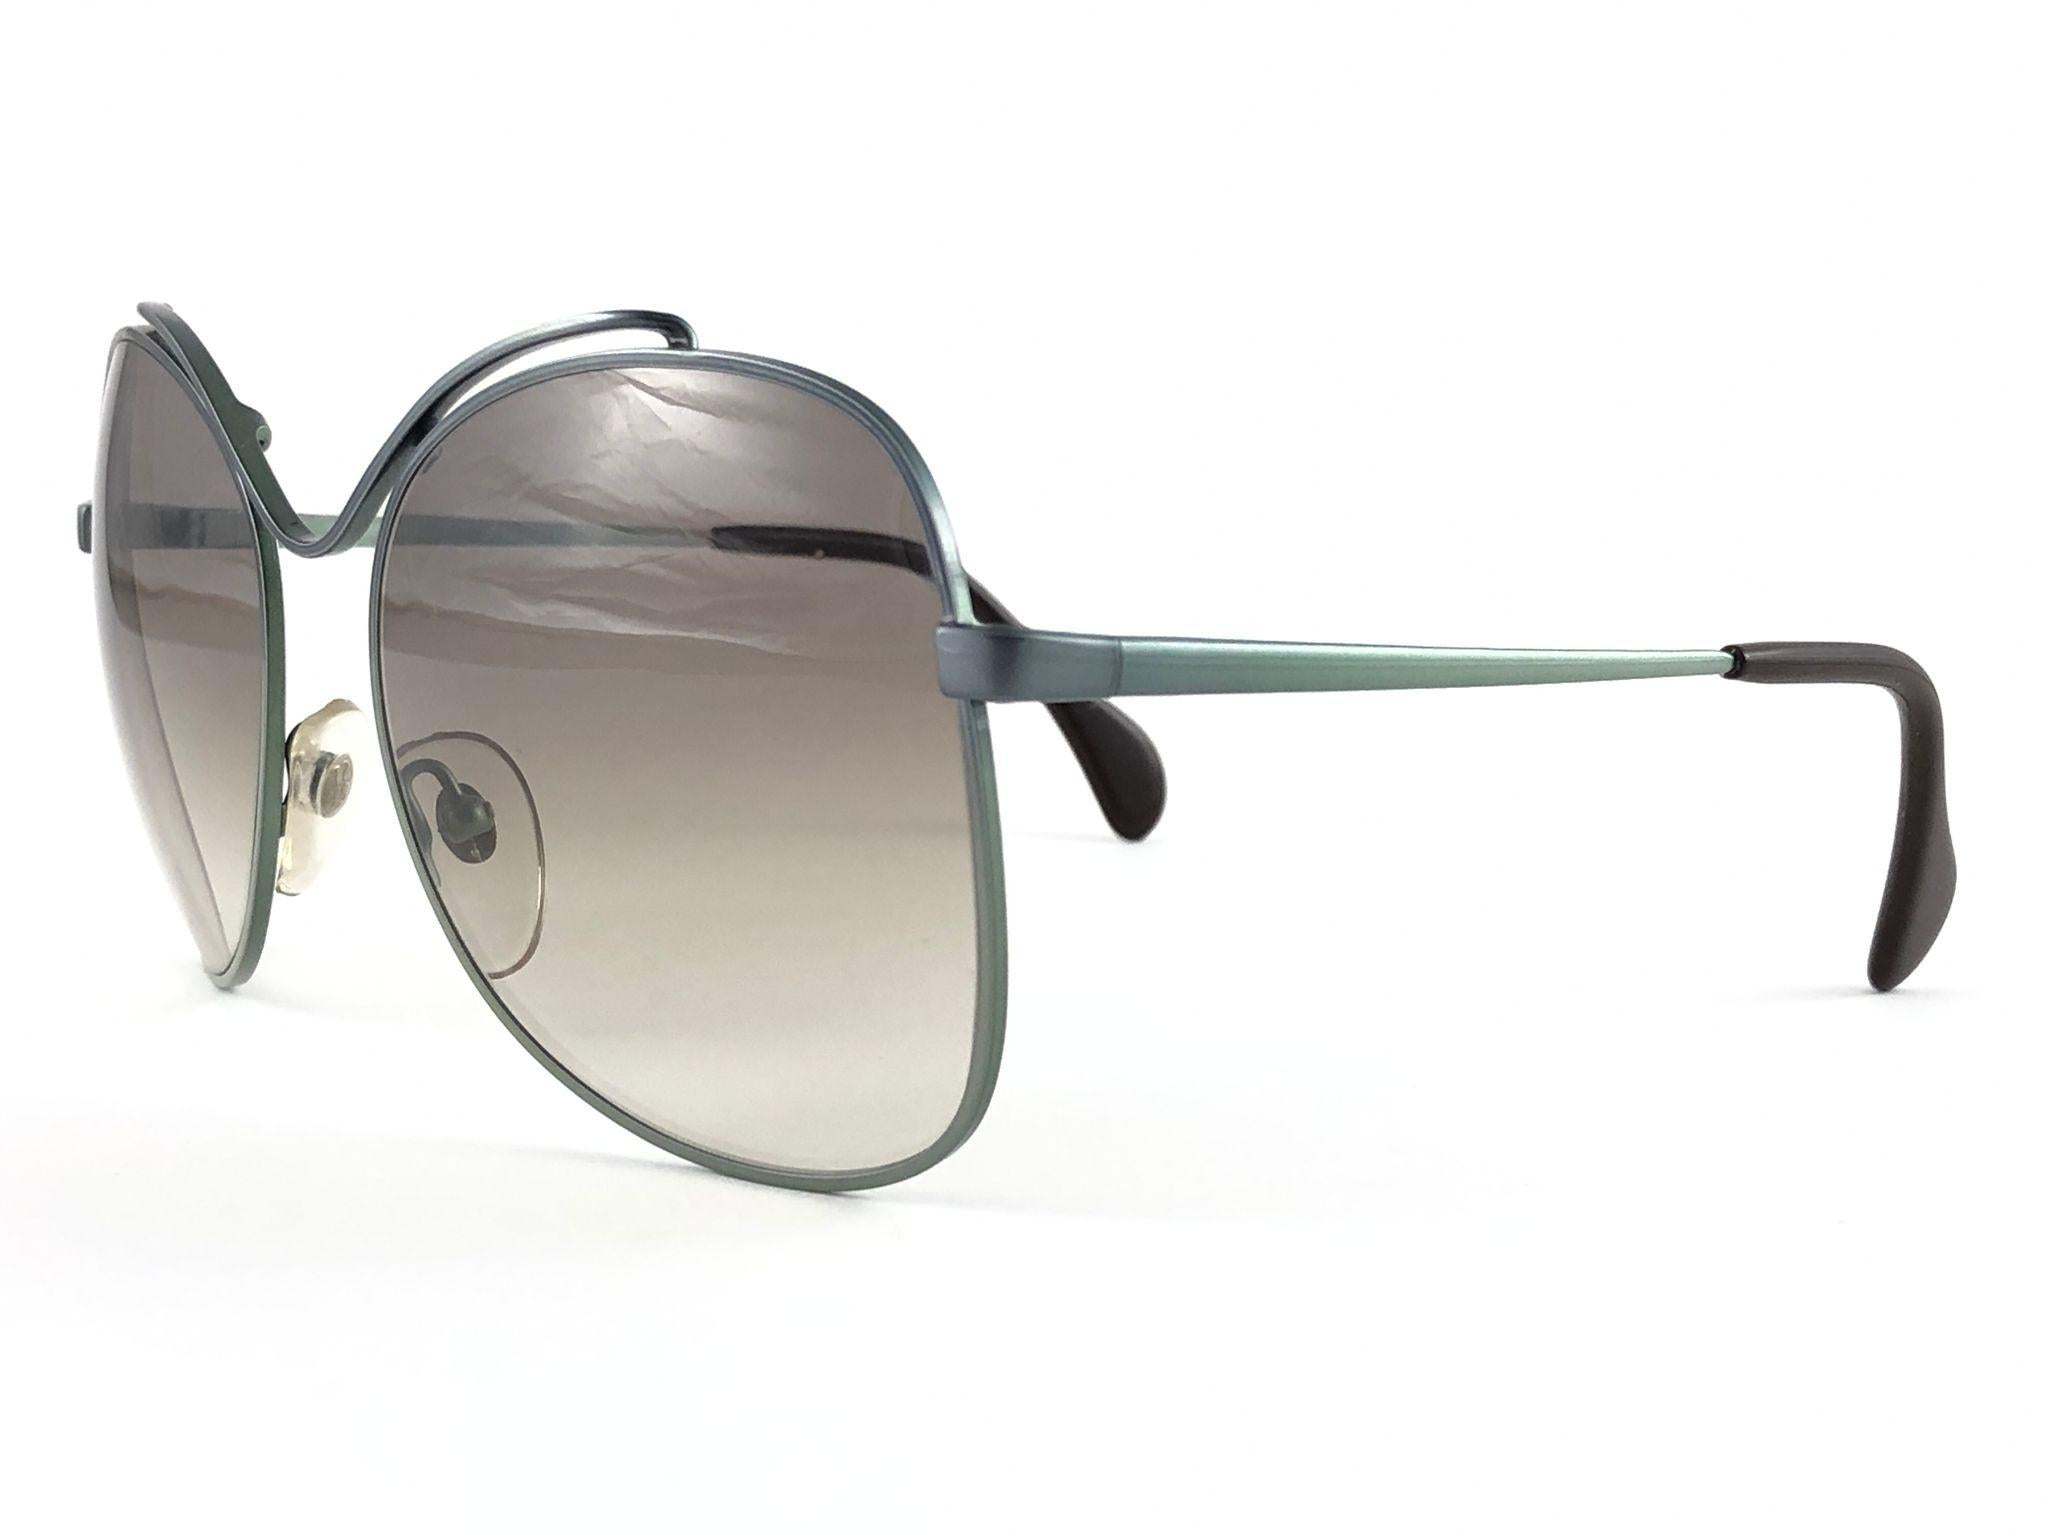 Vintage Rare Menrad 618 Oversized Green Metallic 1970 Sunglasses In Excellent Condition For Sale In Baleares, Baleares